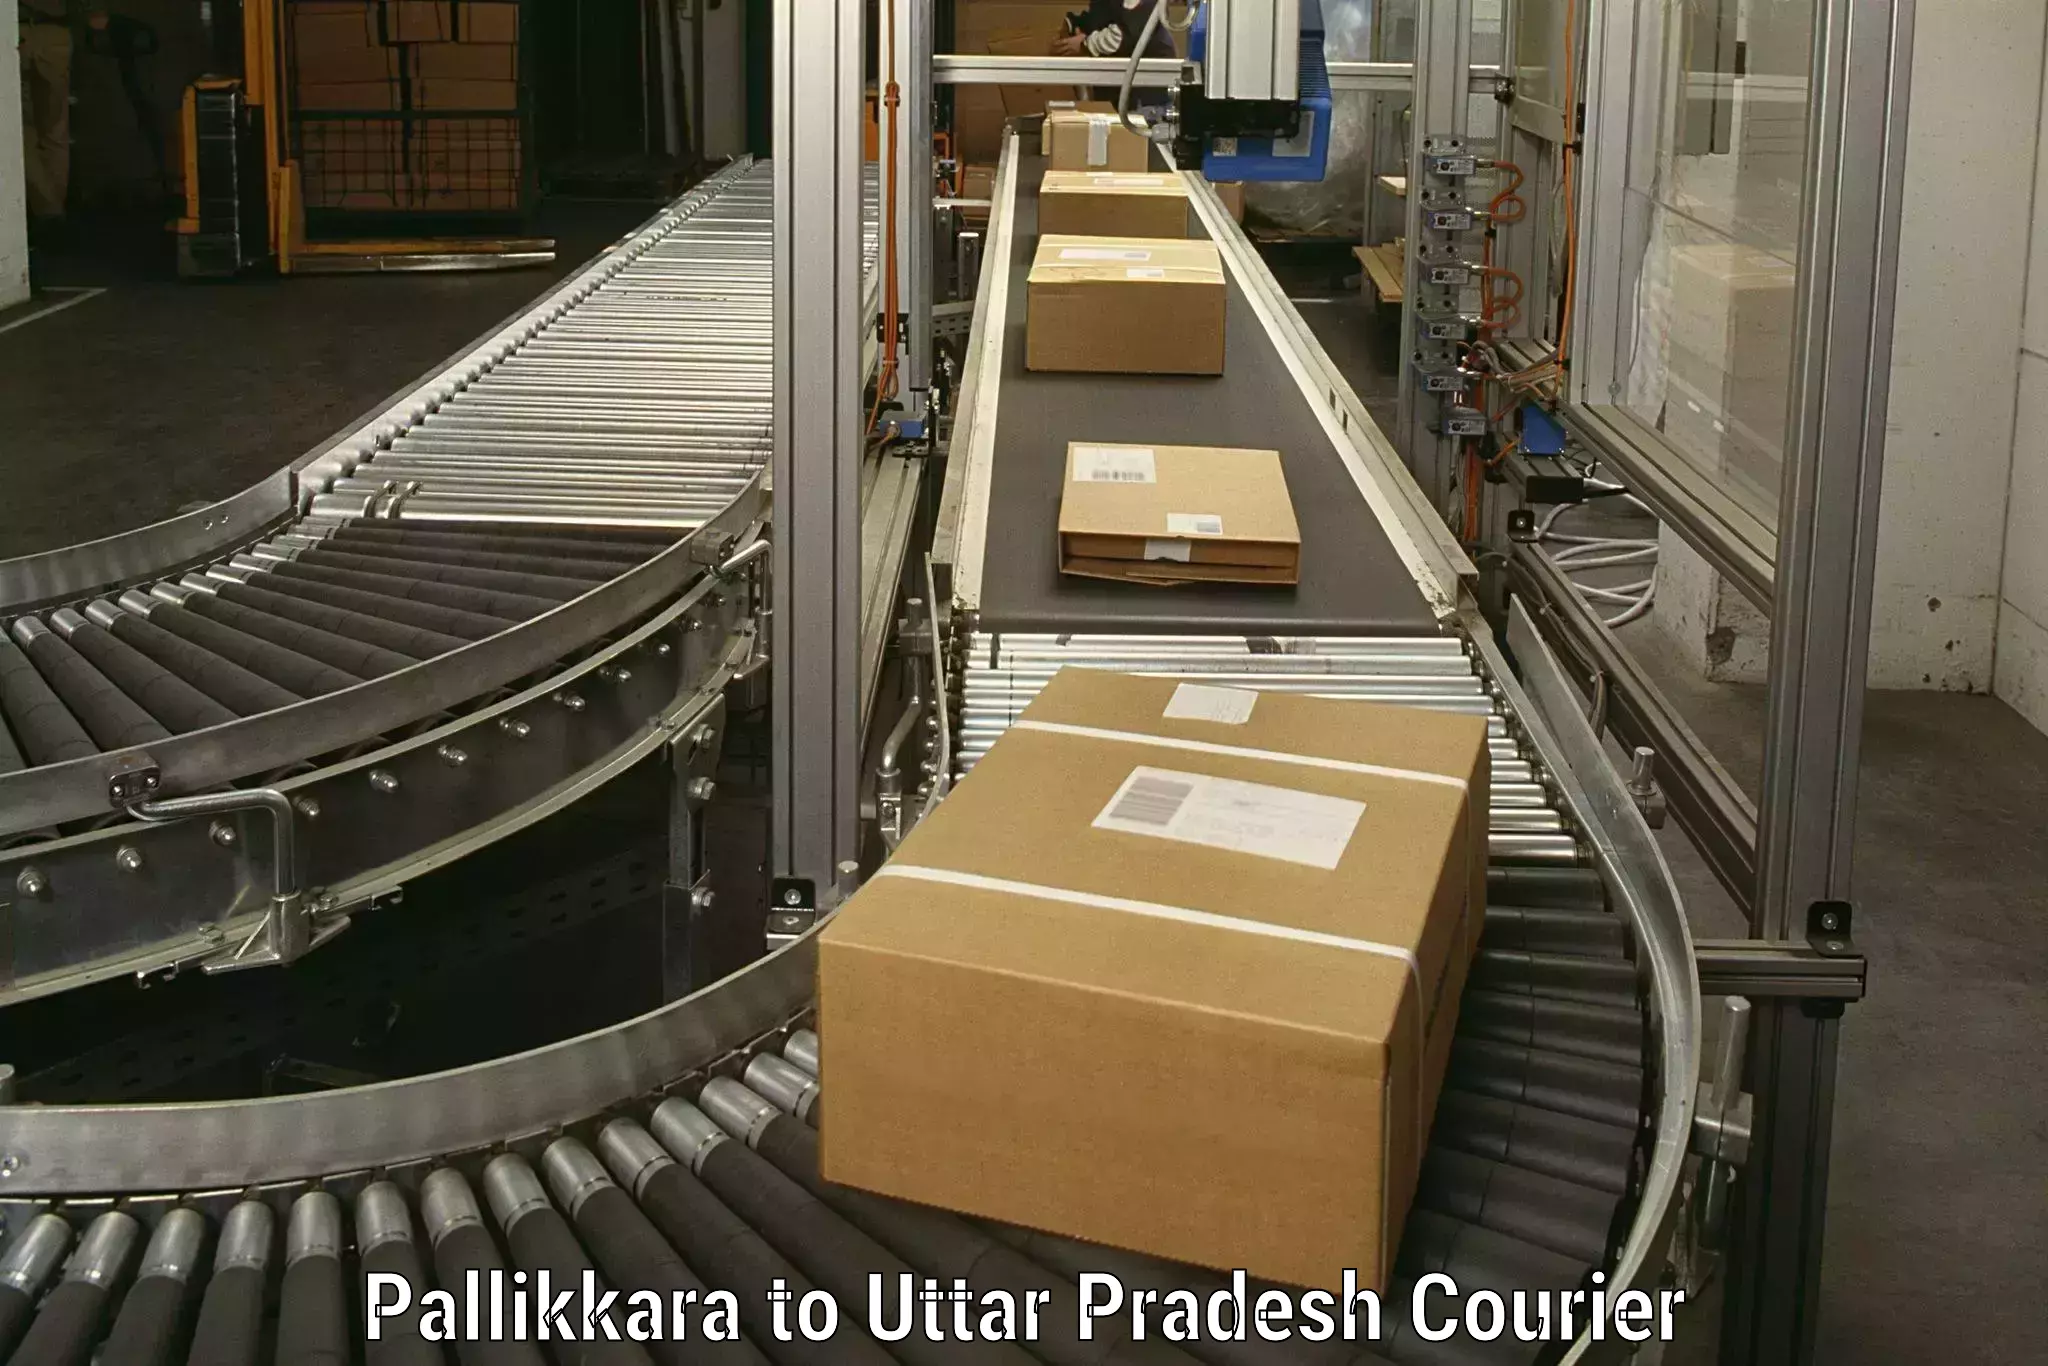 Professional movers and packers Pallikkara to Agra